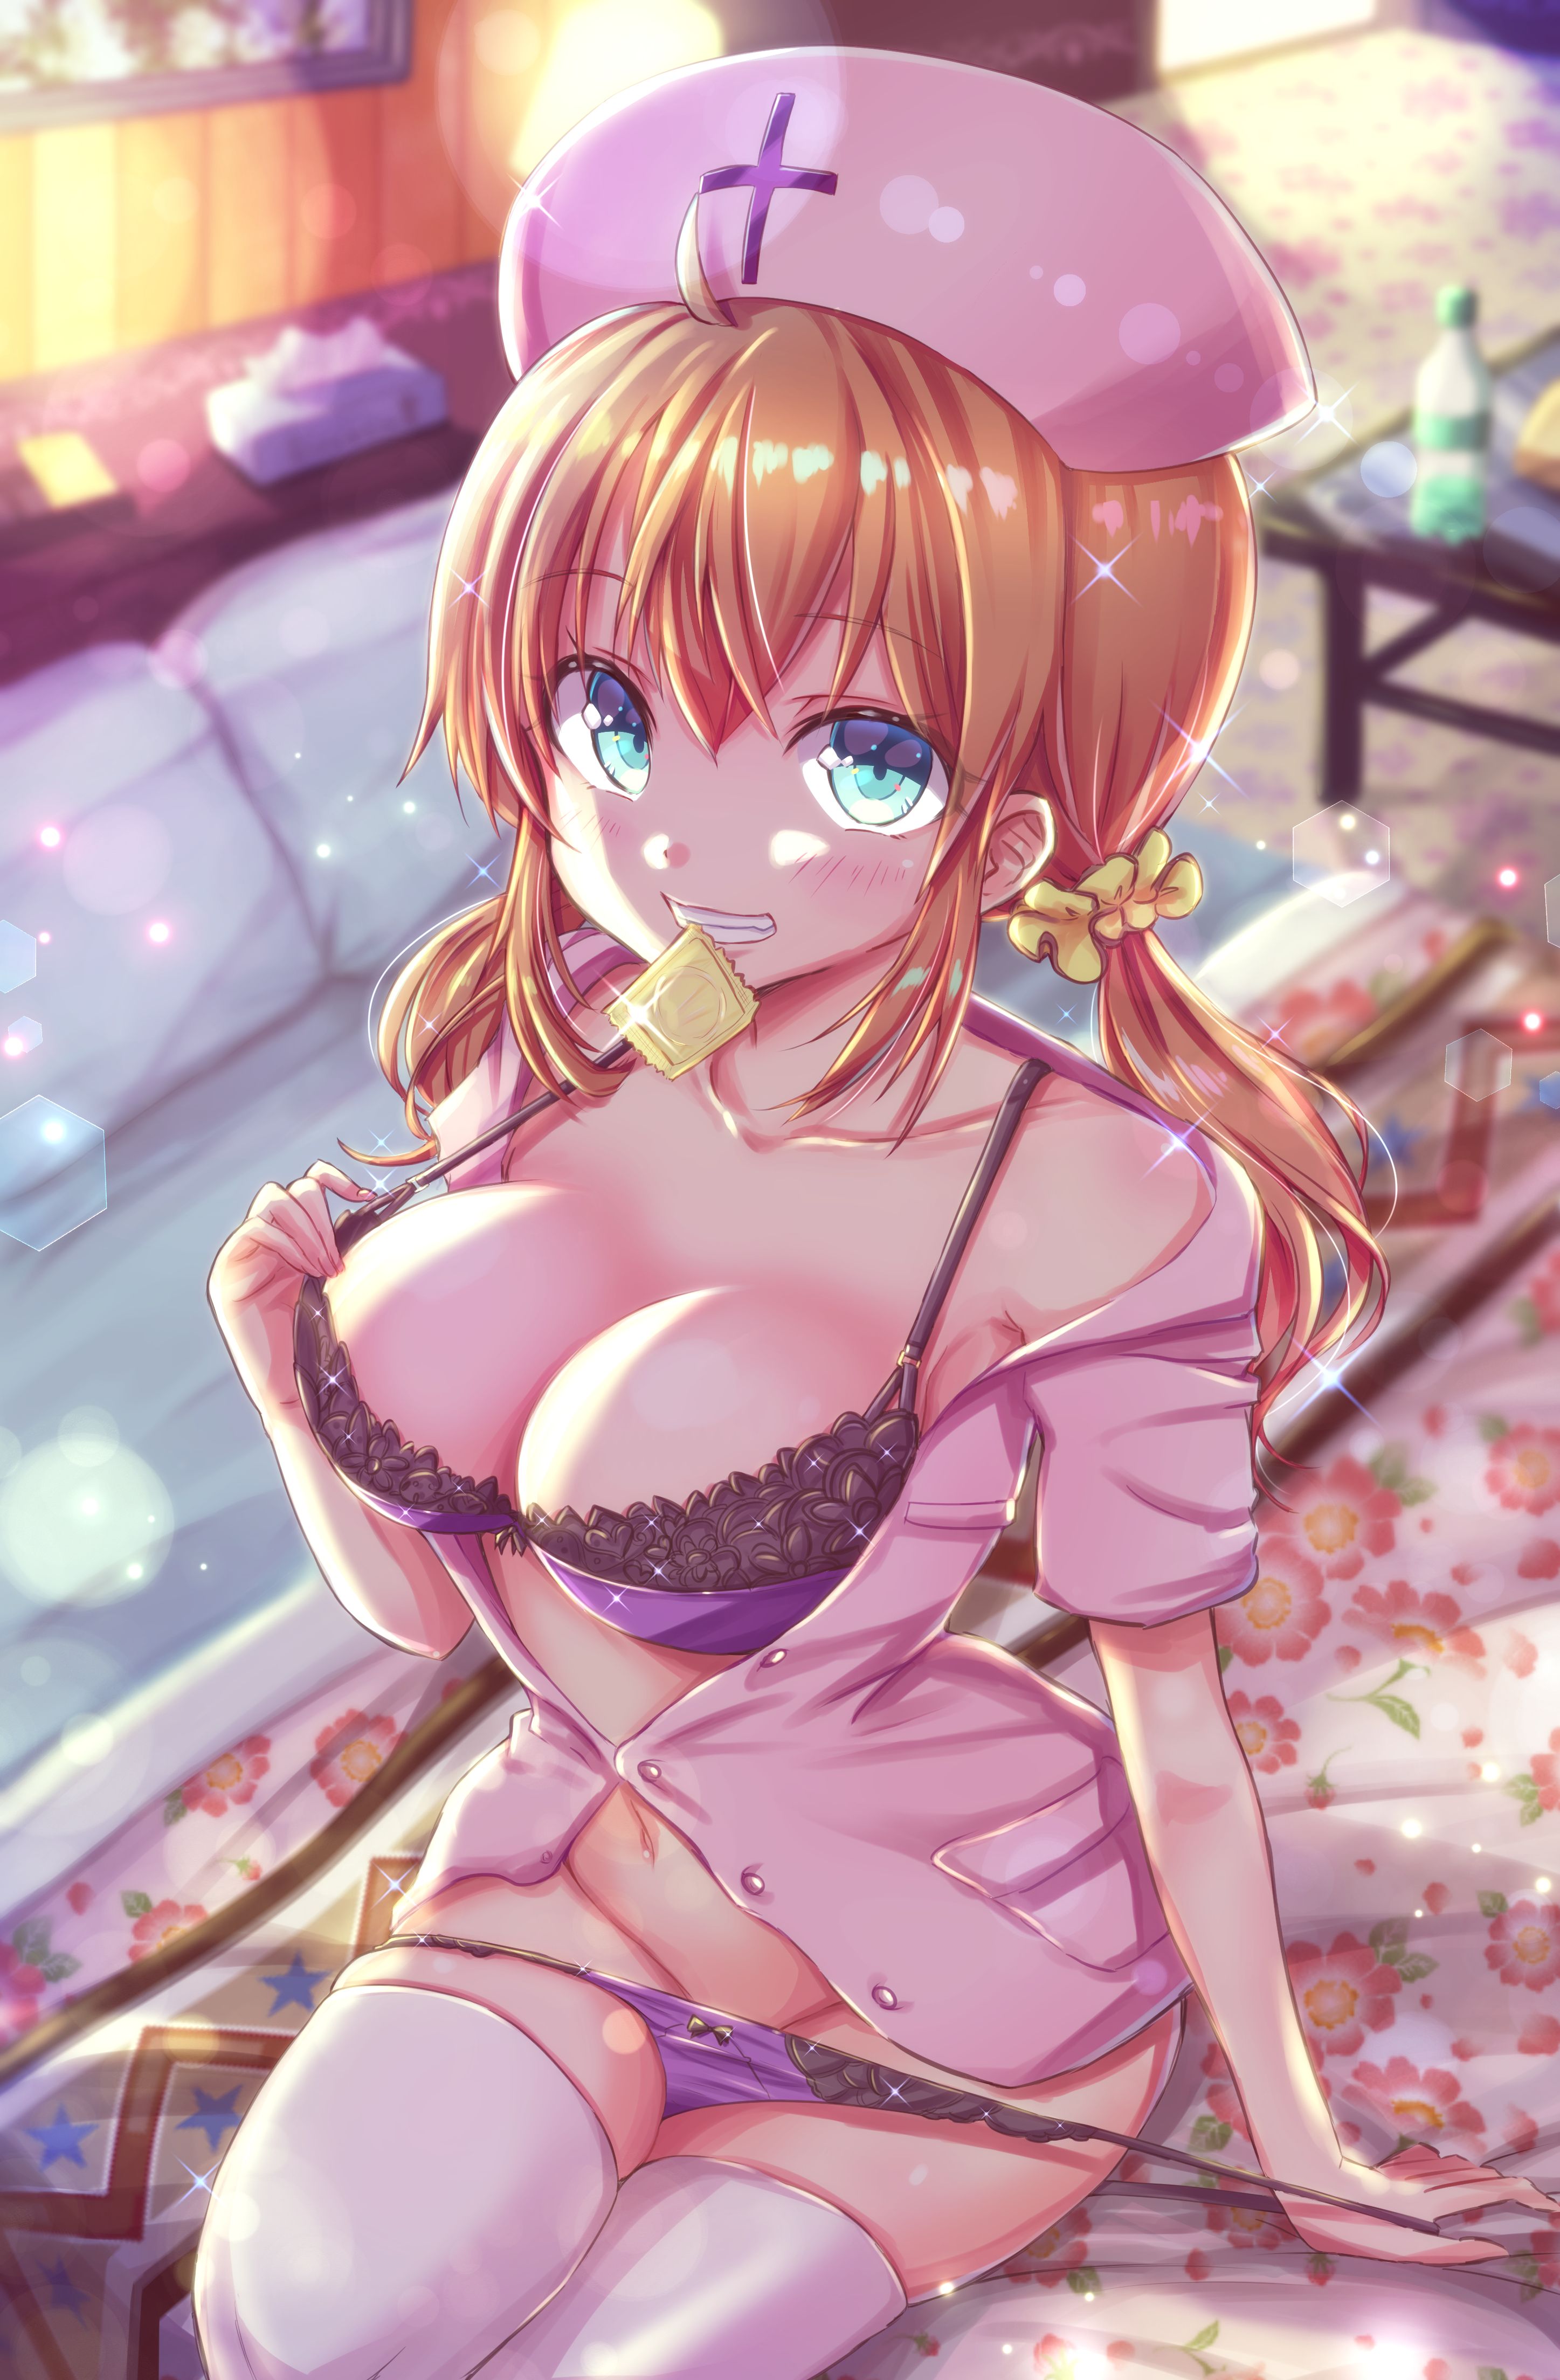 Erotic anime summary Erotic image collection of the valley that seems to smell good [50 sheets] 2